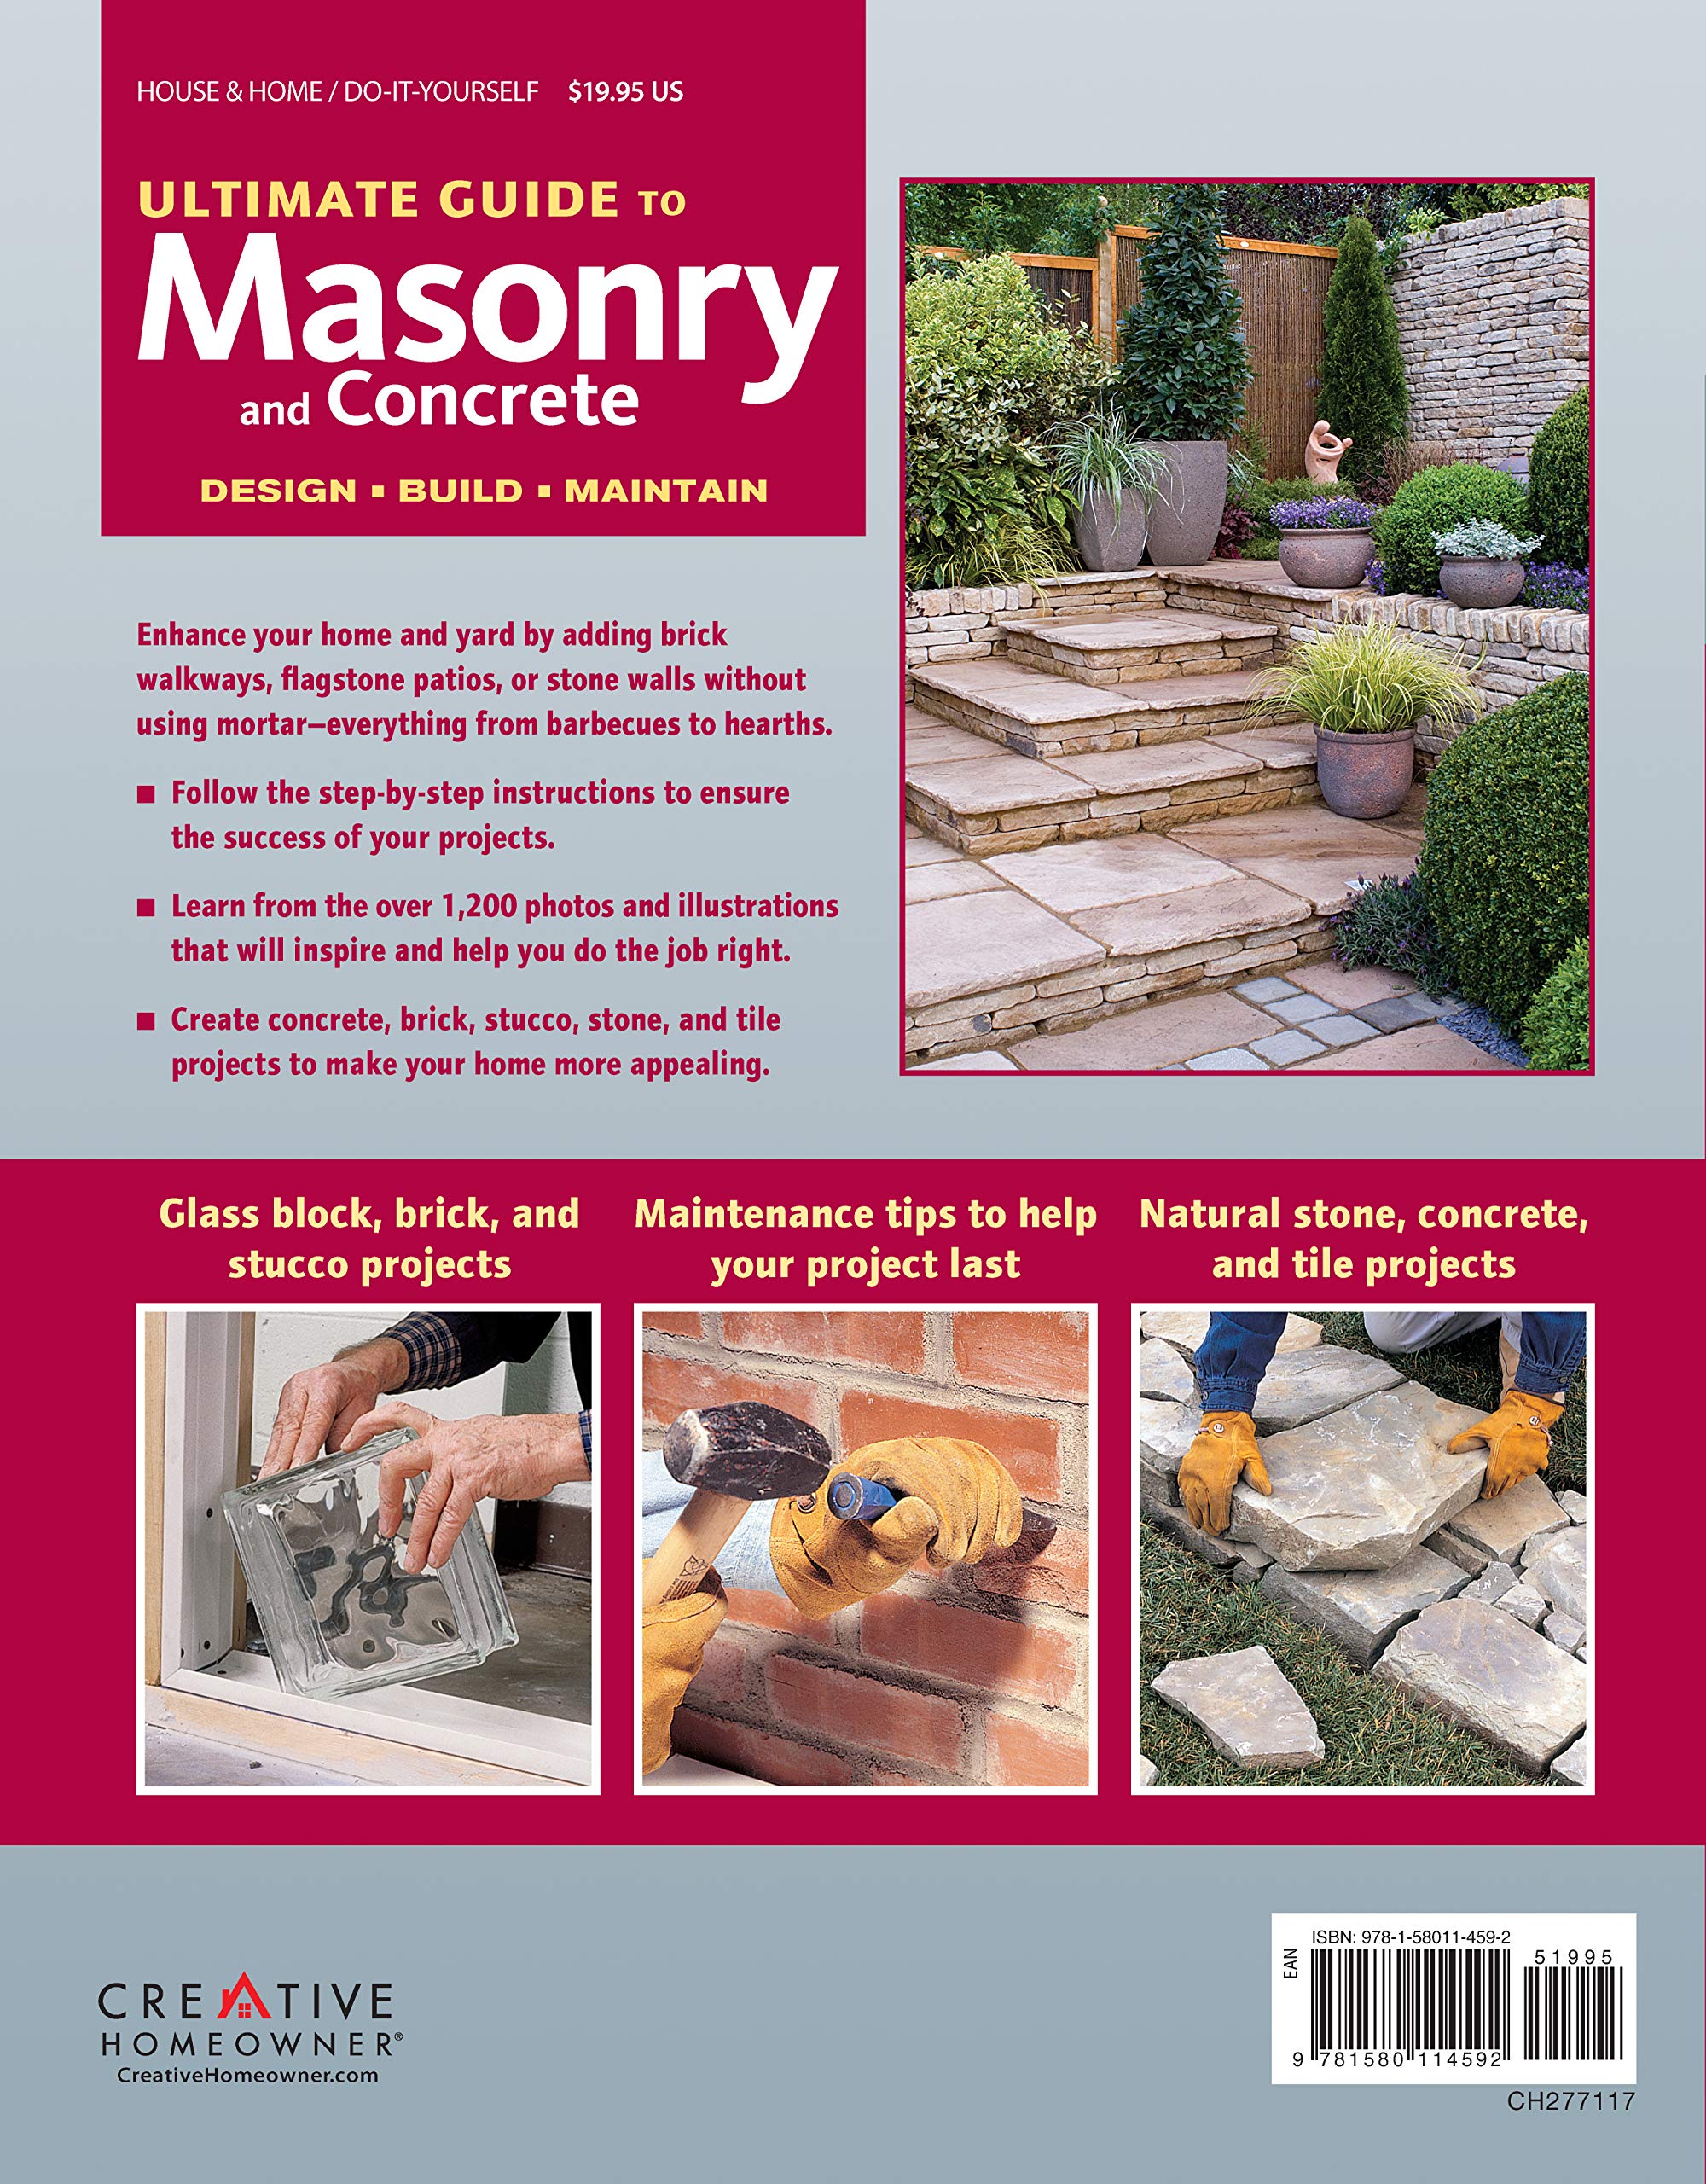 Ultimate Guide: Masonry & Concrete, 3rd edition: Design, Build, Maintain (Creative Homeowner) 60 Projects & Over 1,200 Photos for Concrete, Block, Brick, Stone, Tile, & Stucco